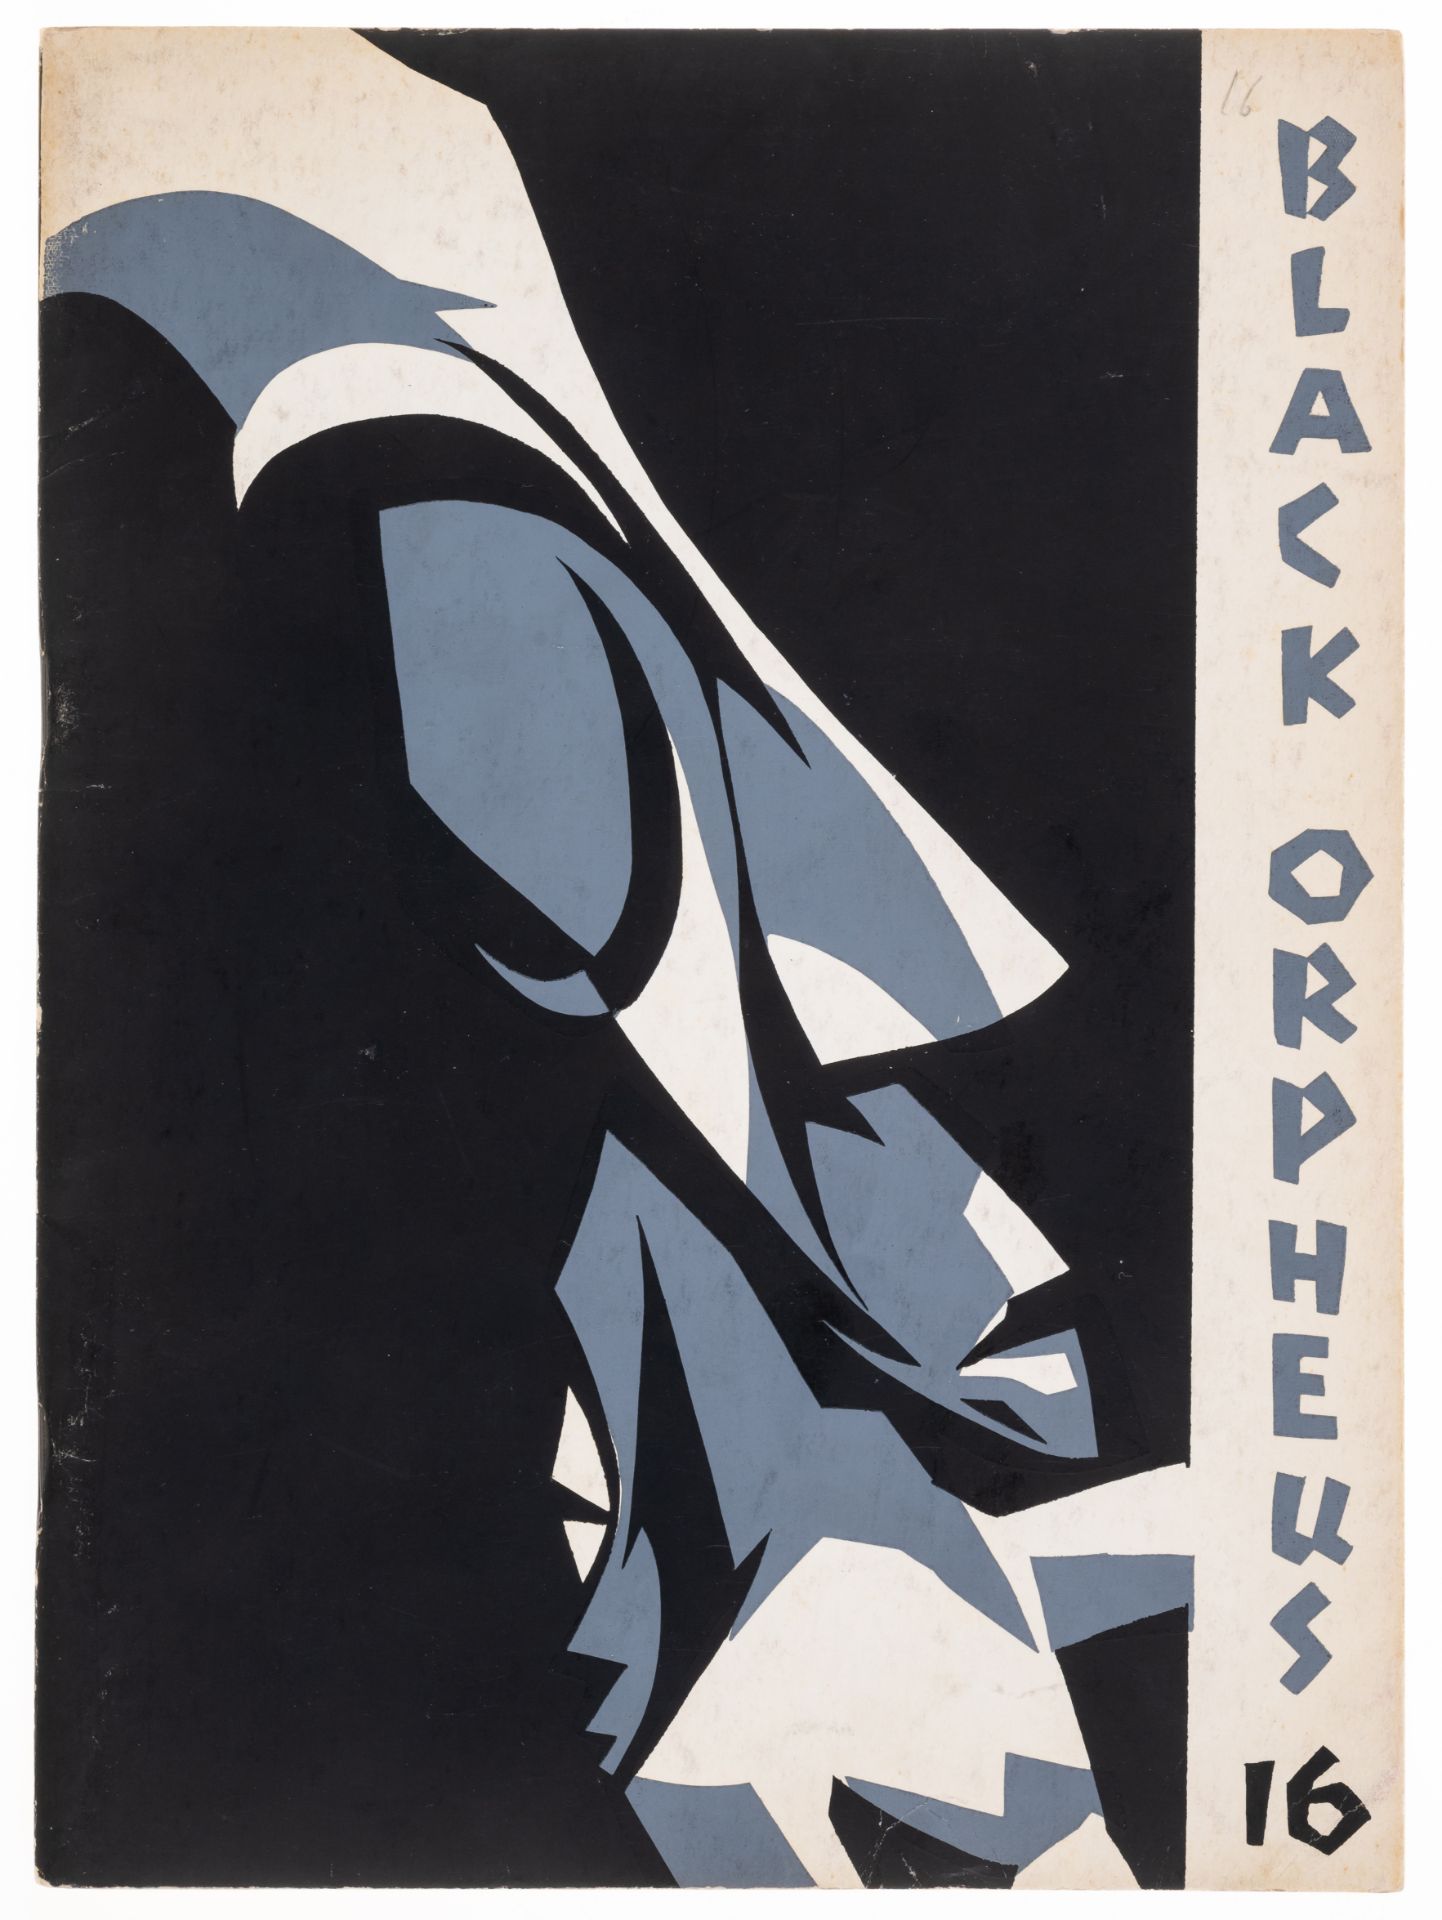 Black Orpheus: A Journal of African and Afro-American Literature, no.16, Nigeria, Mbari, 1964. - Image 2 of 2